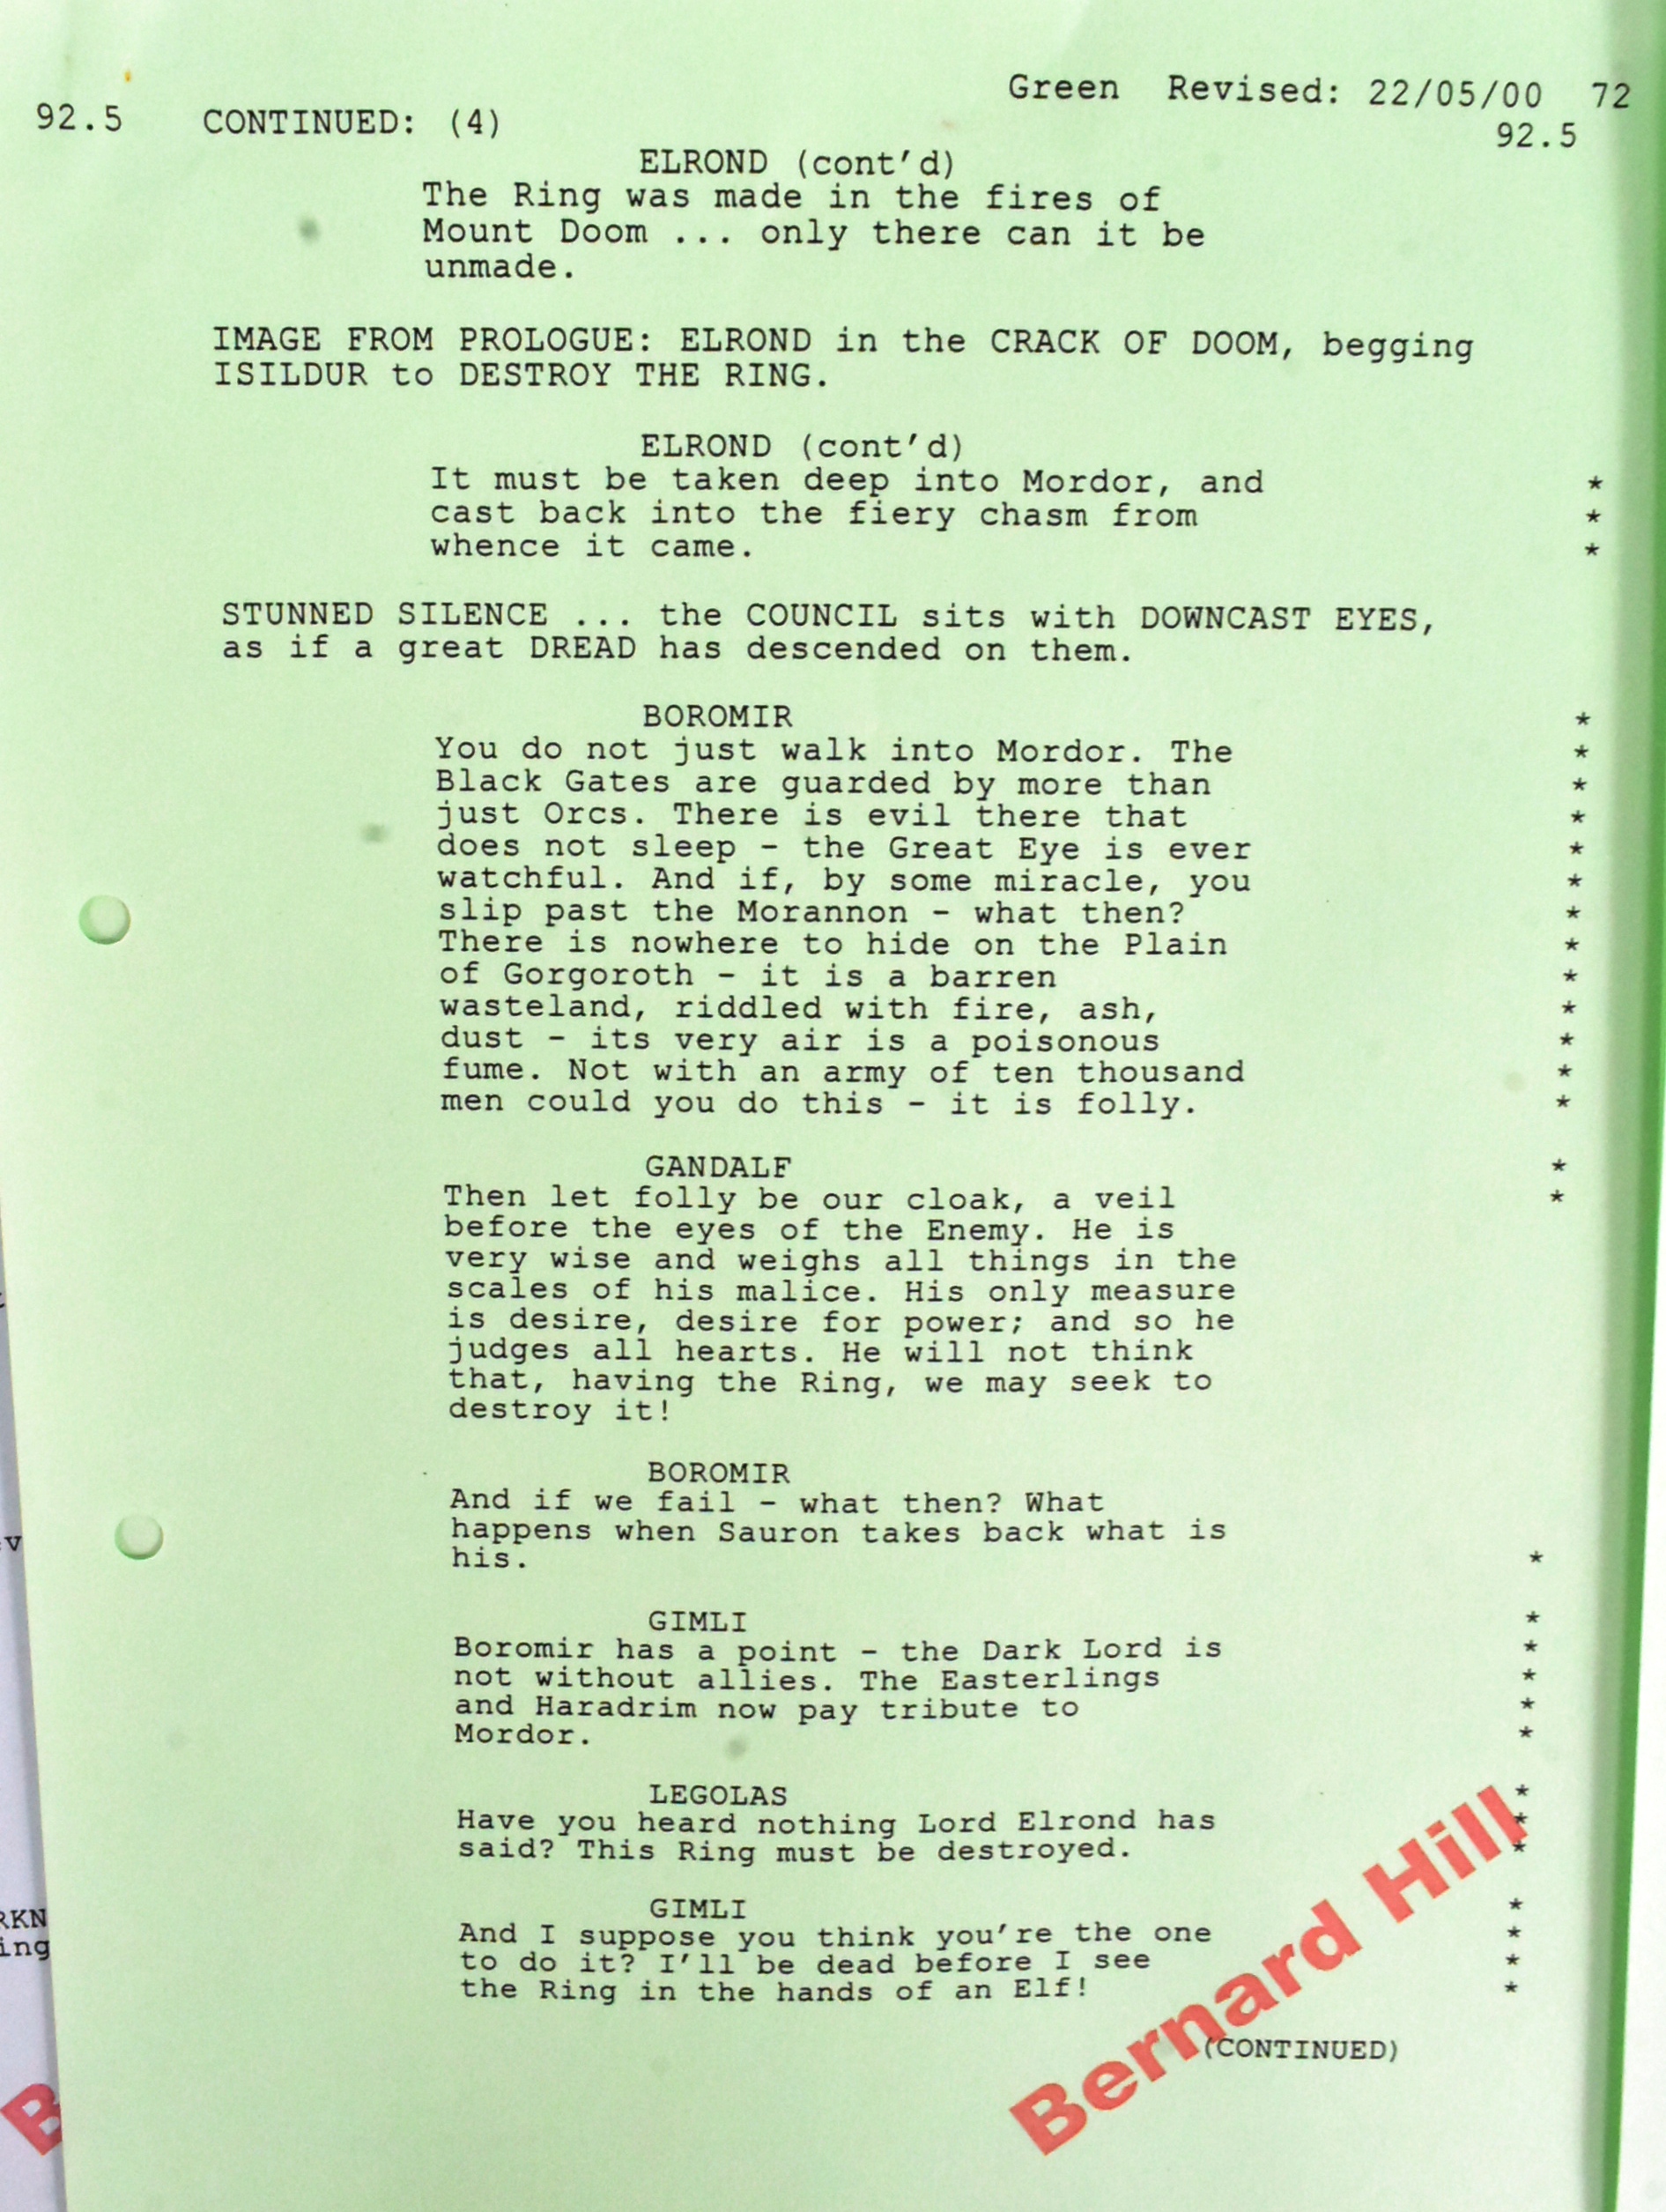 LORD OF THE RINGS - PRODUCTION SCRIPT EXTRACTS & PHOTO - Image 6 of 8